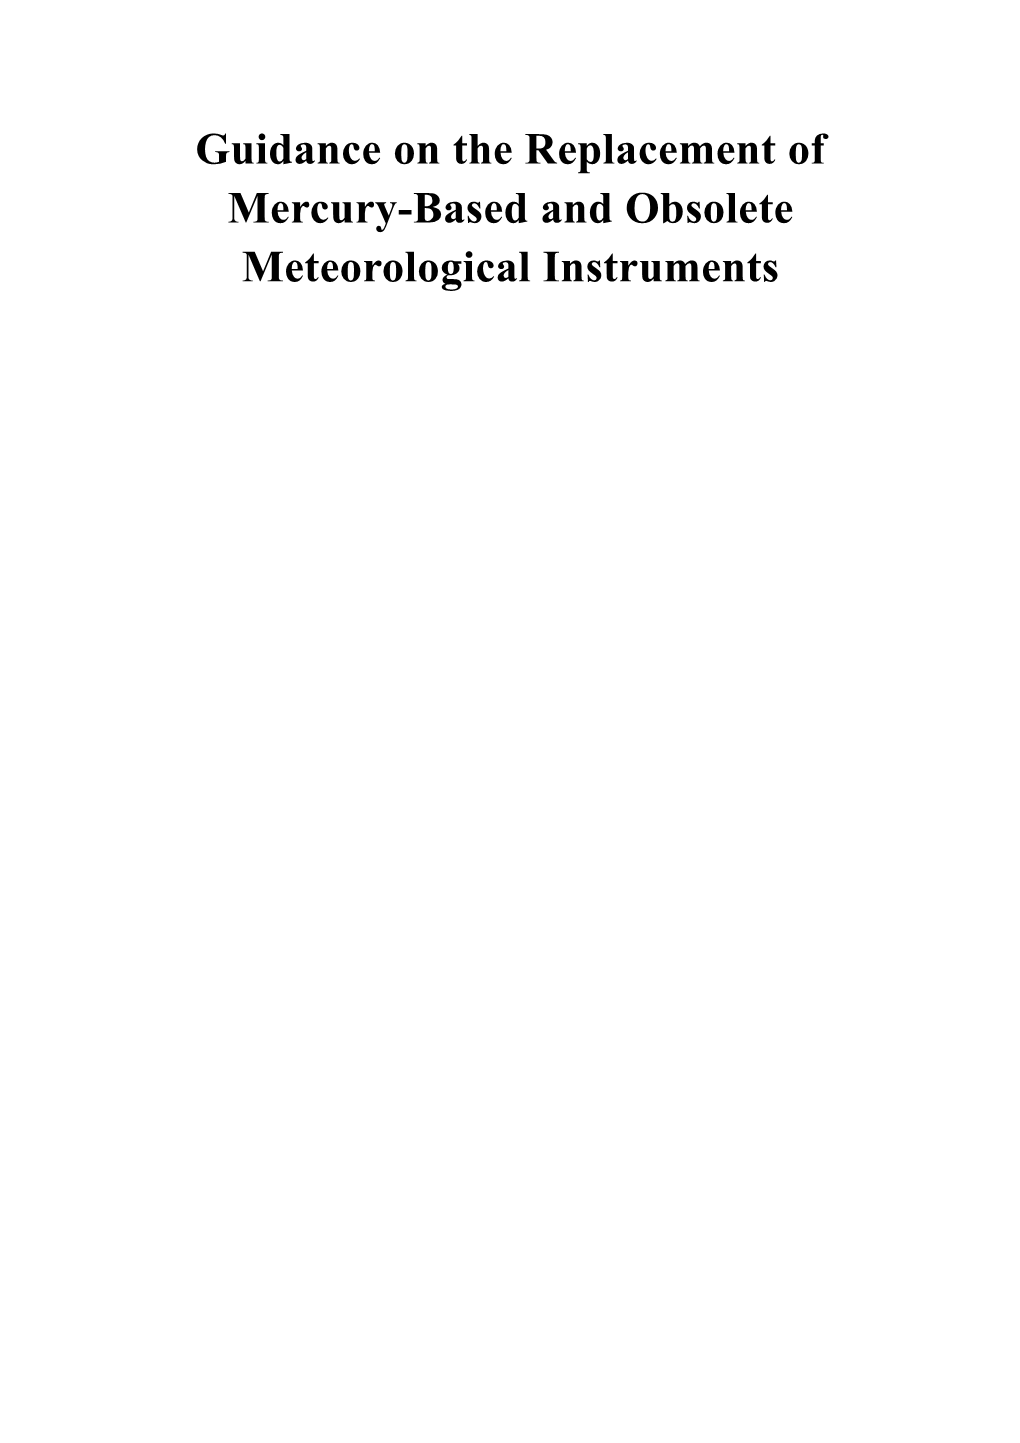 Guidance Onthe Replacement of Mercury-Based and Obsolete Meteorological Instruments